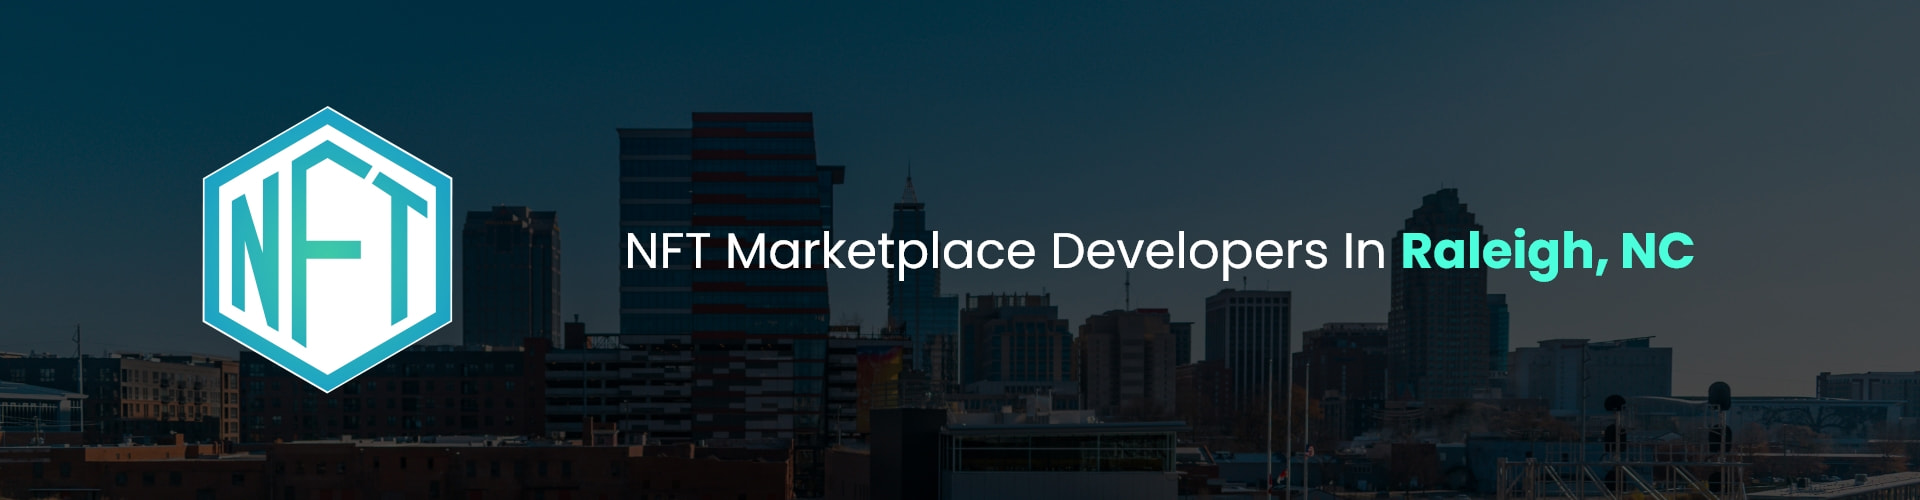 hire nft marketplace developers in raleigh